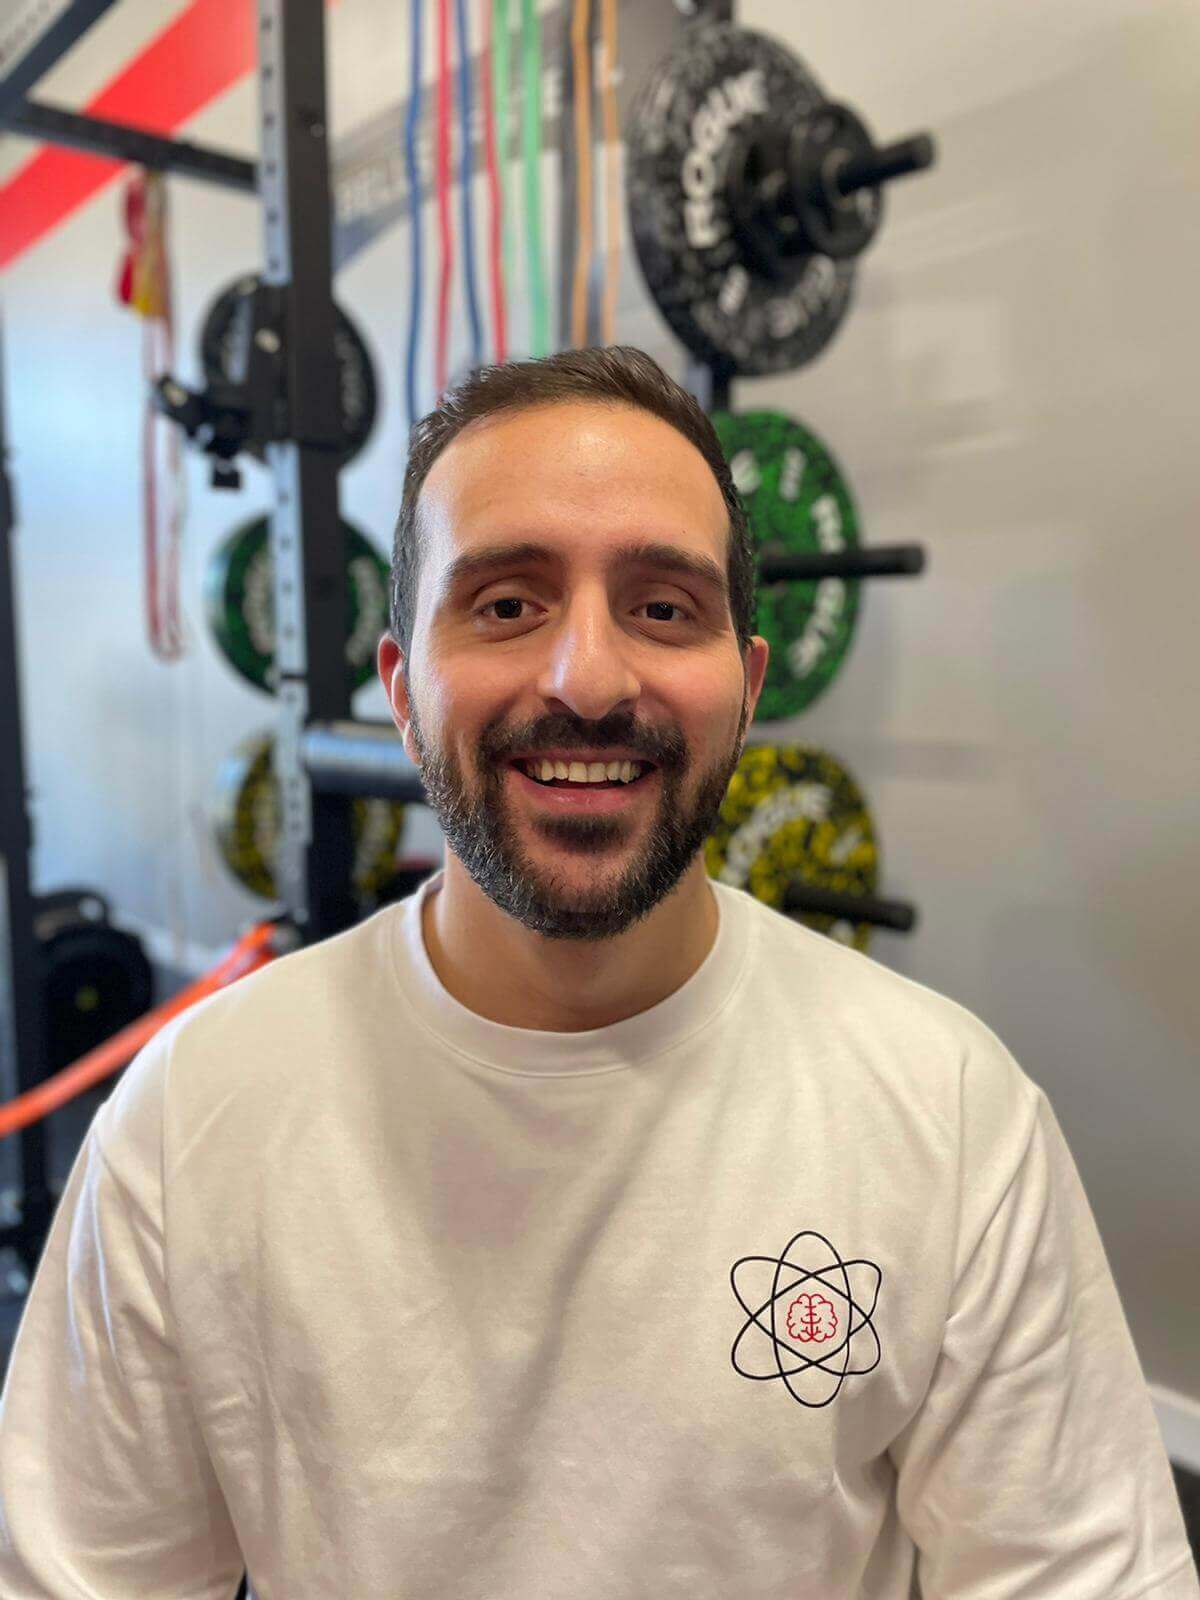  Sami Brochu, co-founder of Studio Fit U, certified sports therapist and naturopath, specializing in injury rehabilitation and prevention, providing advanced coaching methods in Montreal.